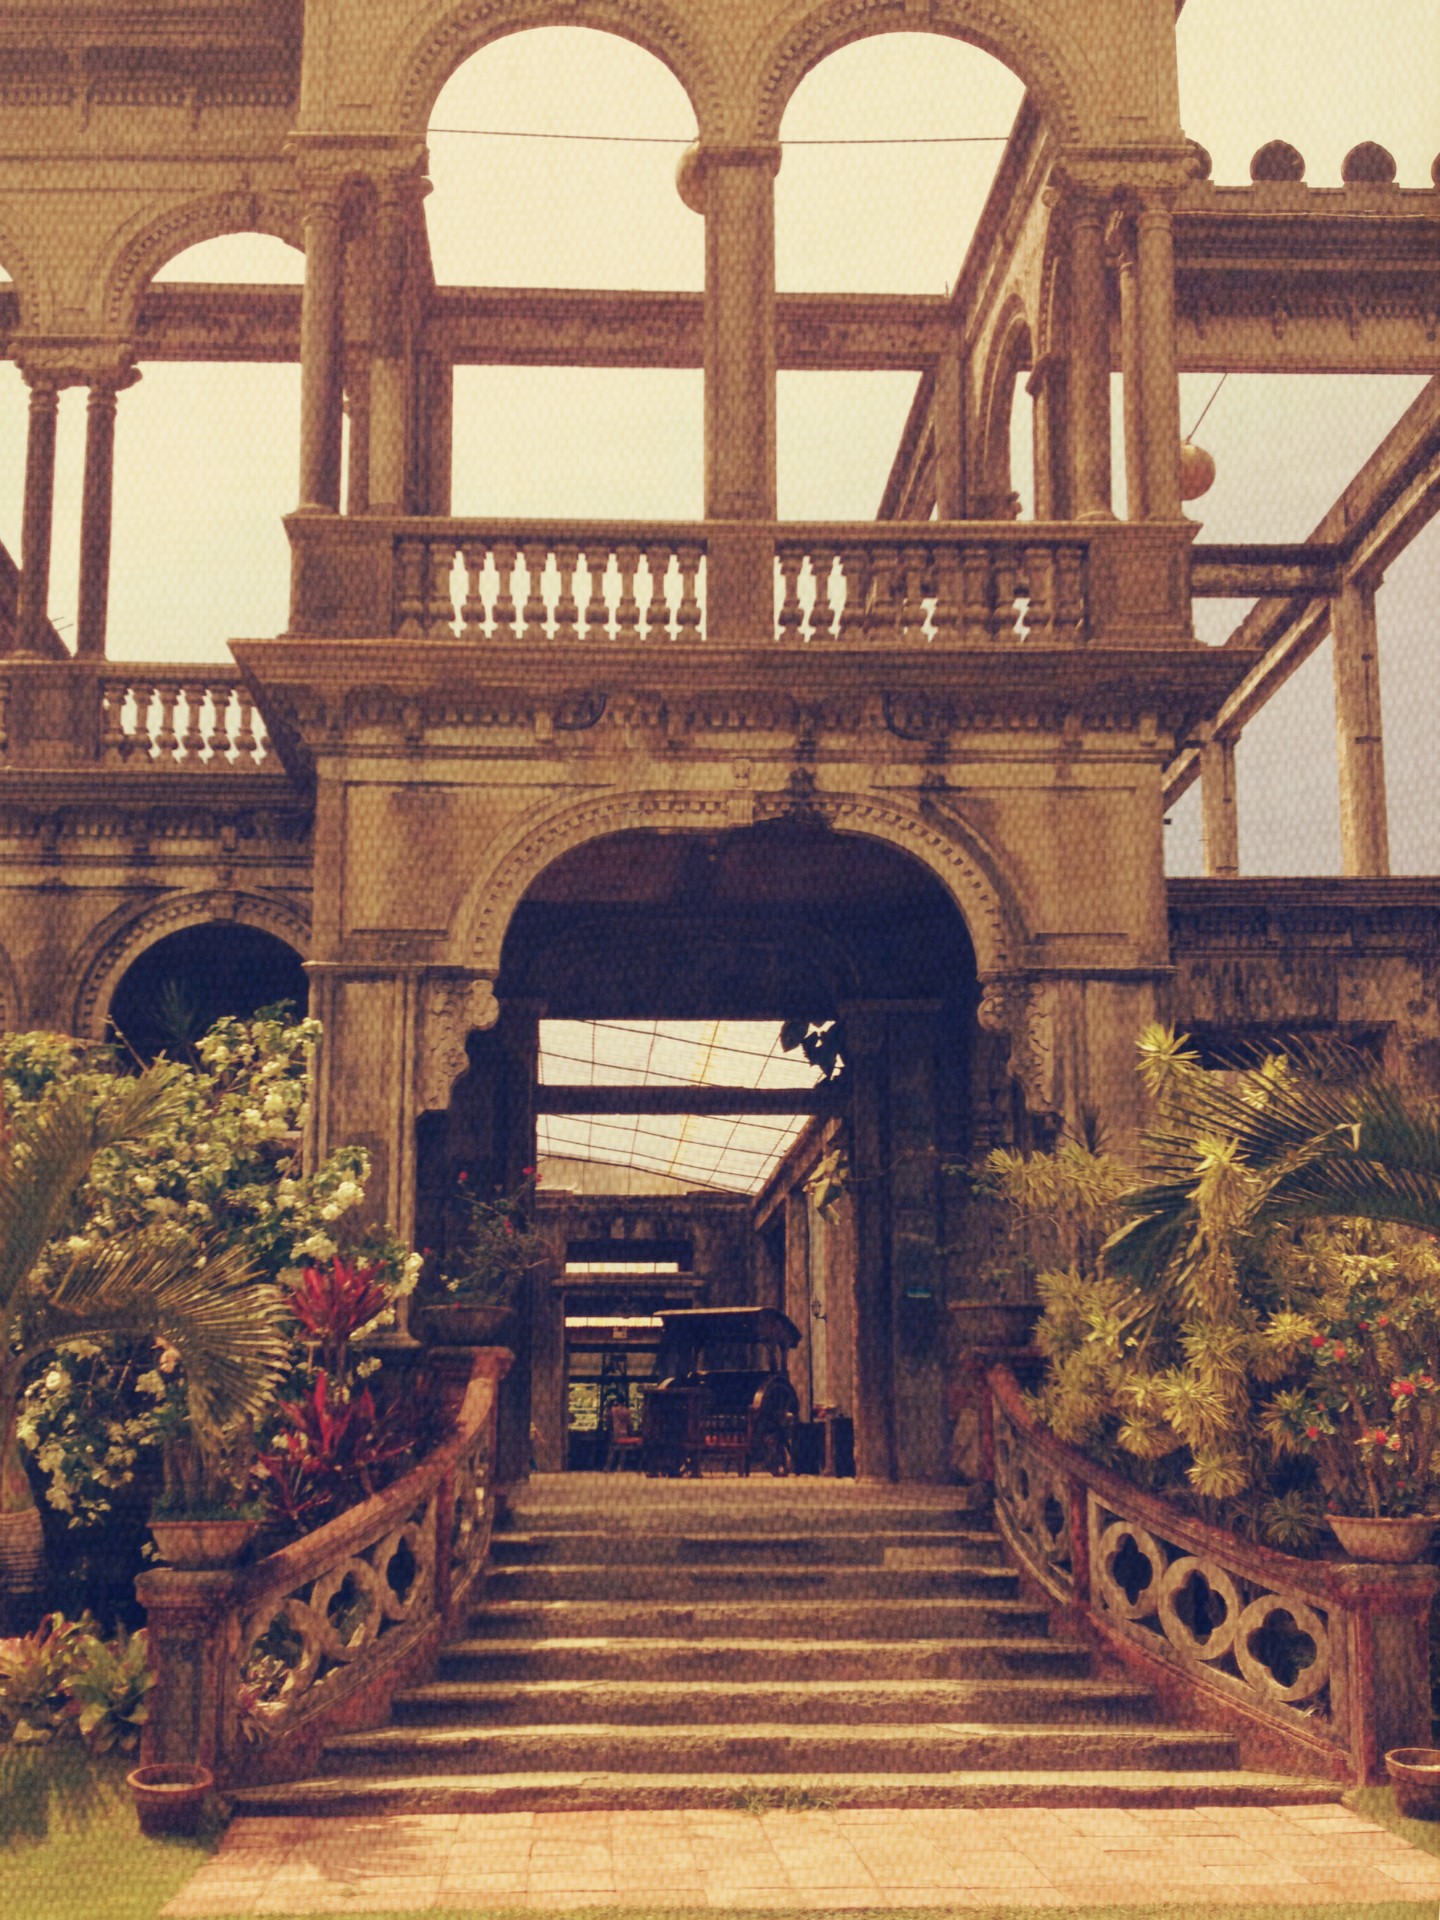 Ruins In Bacolod